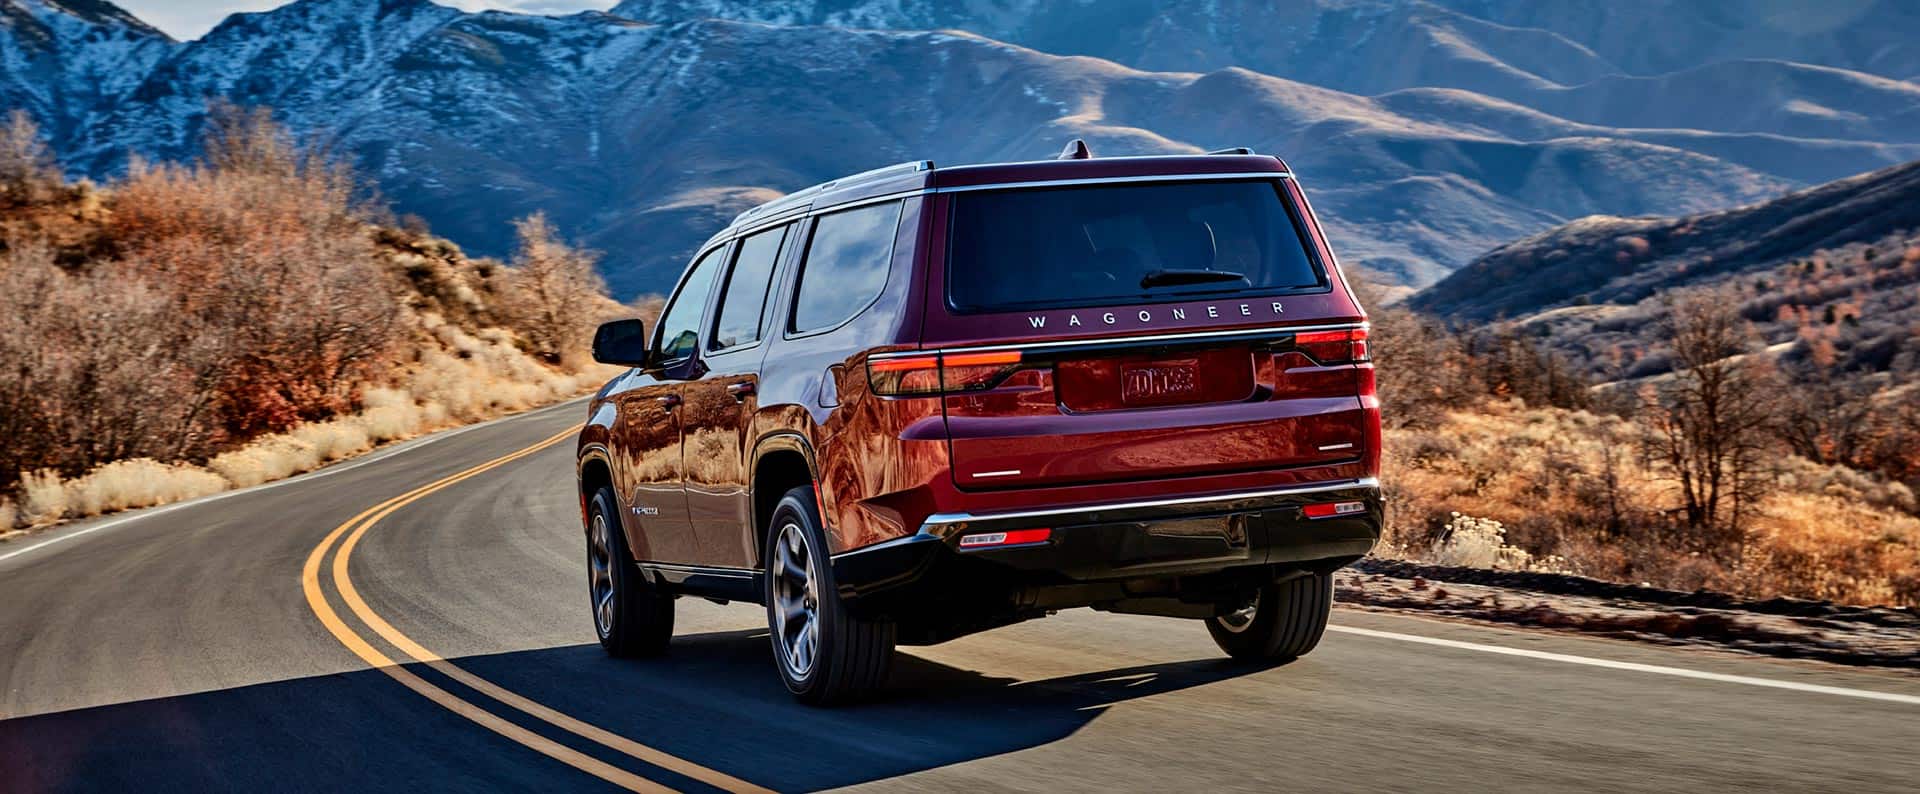 The rear view of the 2023 Wagoneer Series III being driven on a winding road in the mountains.